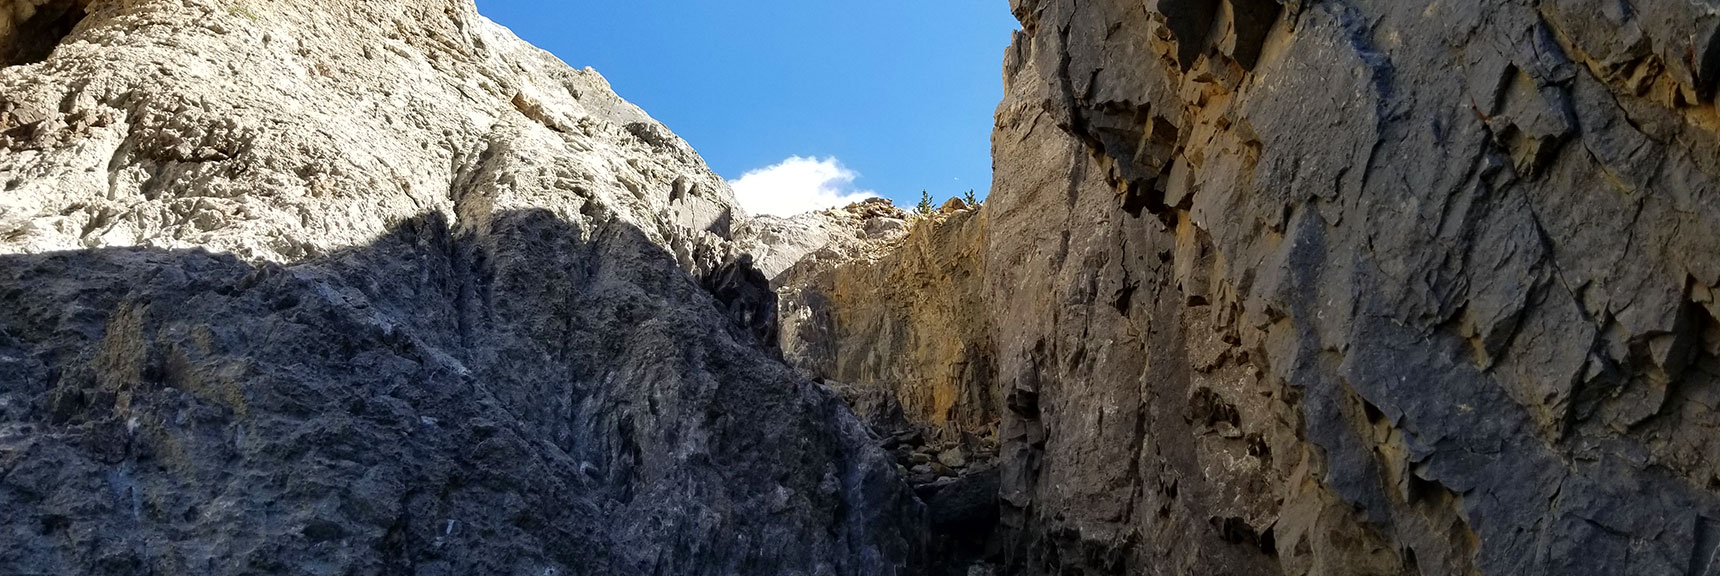 Ascending the Final Approach Canyon on Mummy Mt West Side in Mt Charleston Wilderness, Nevada